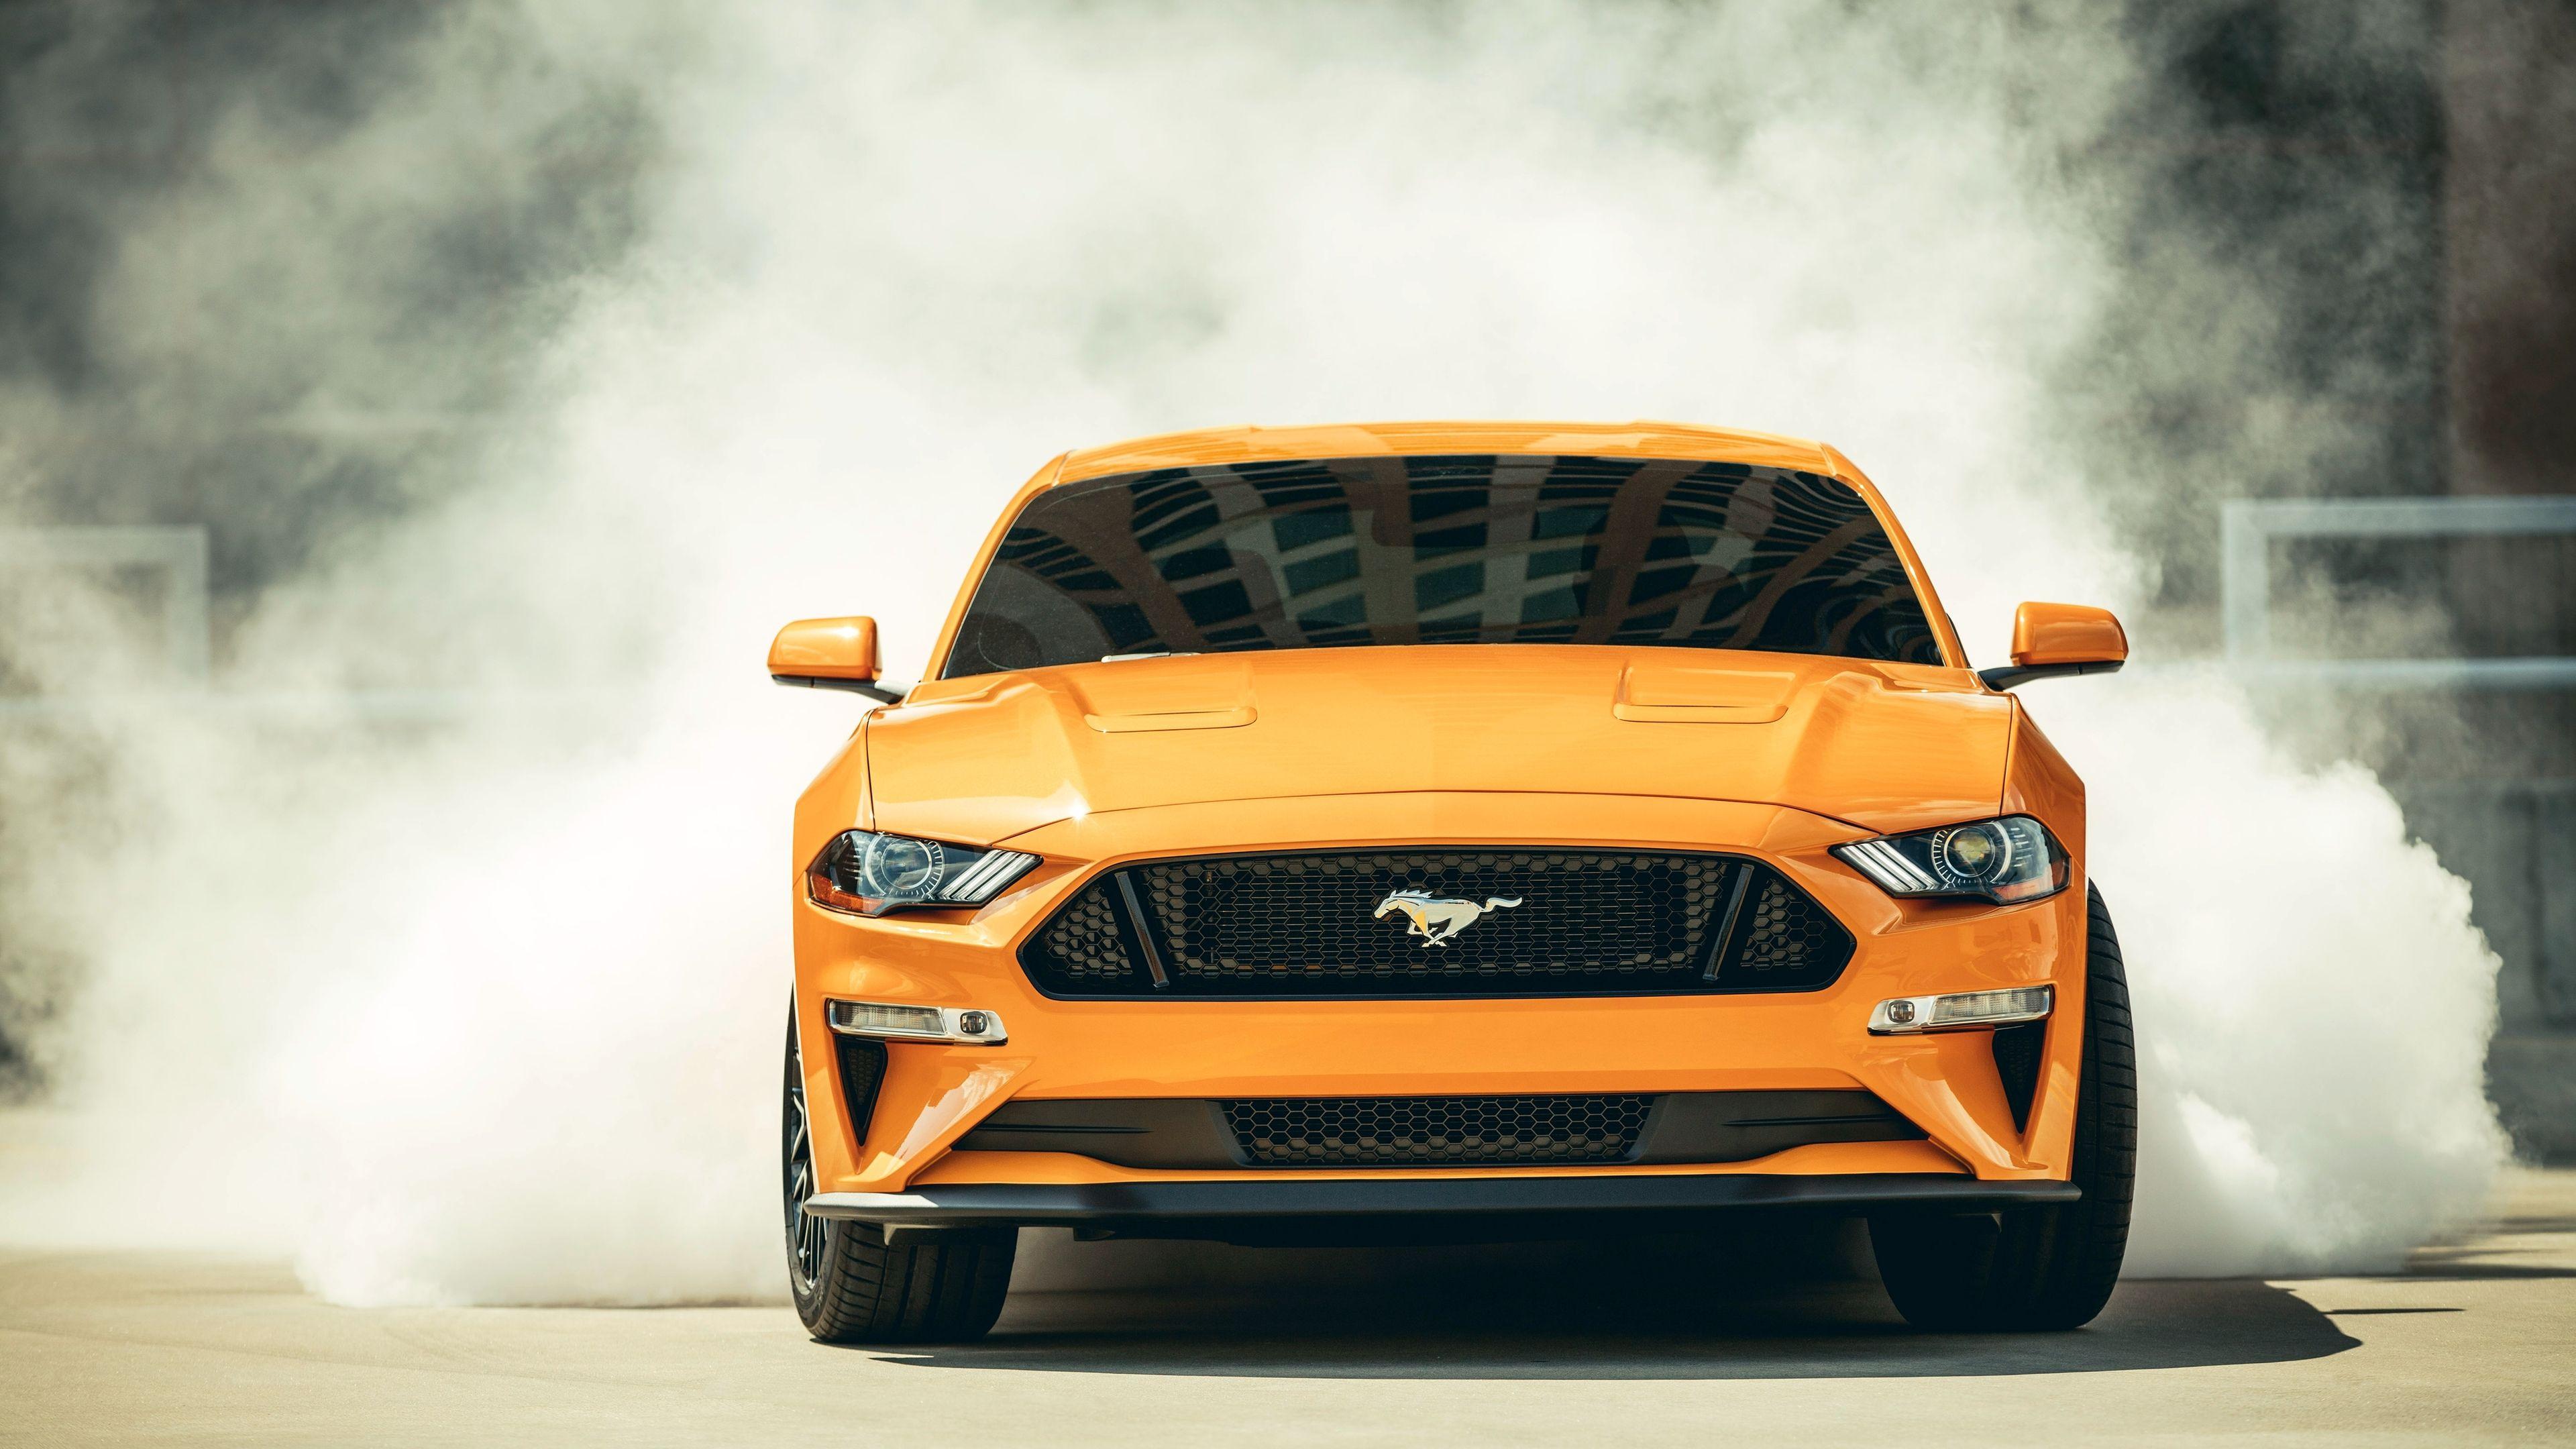 40+ Ford Mustang Wallpaper 4k Pack For Pc free download